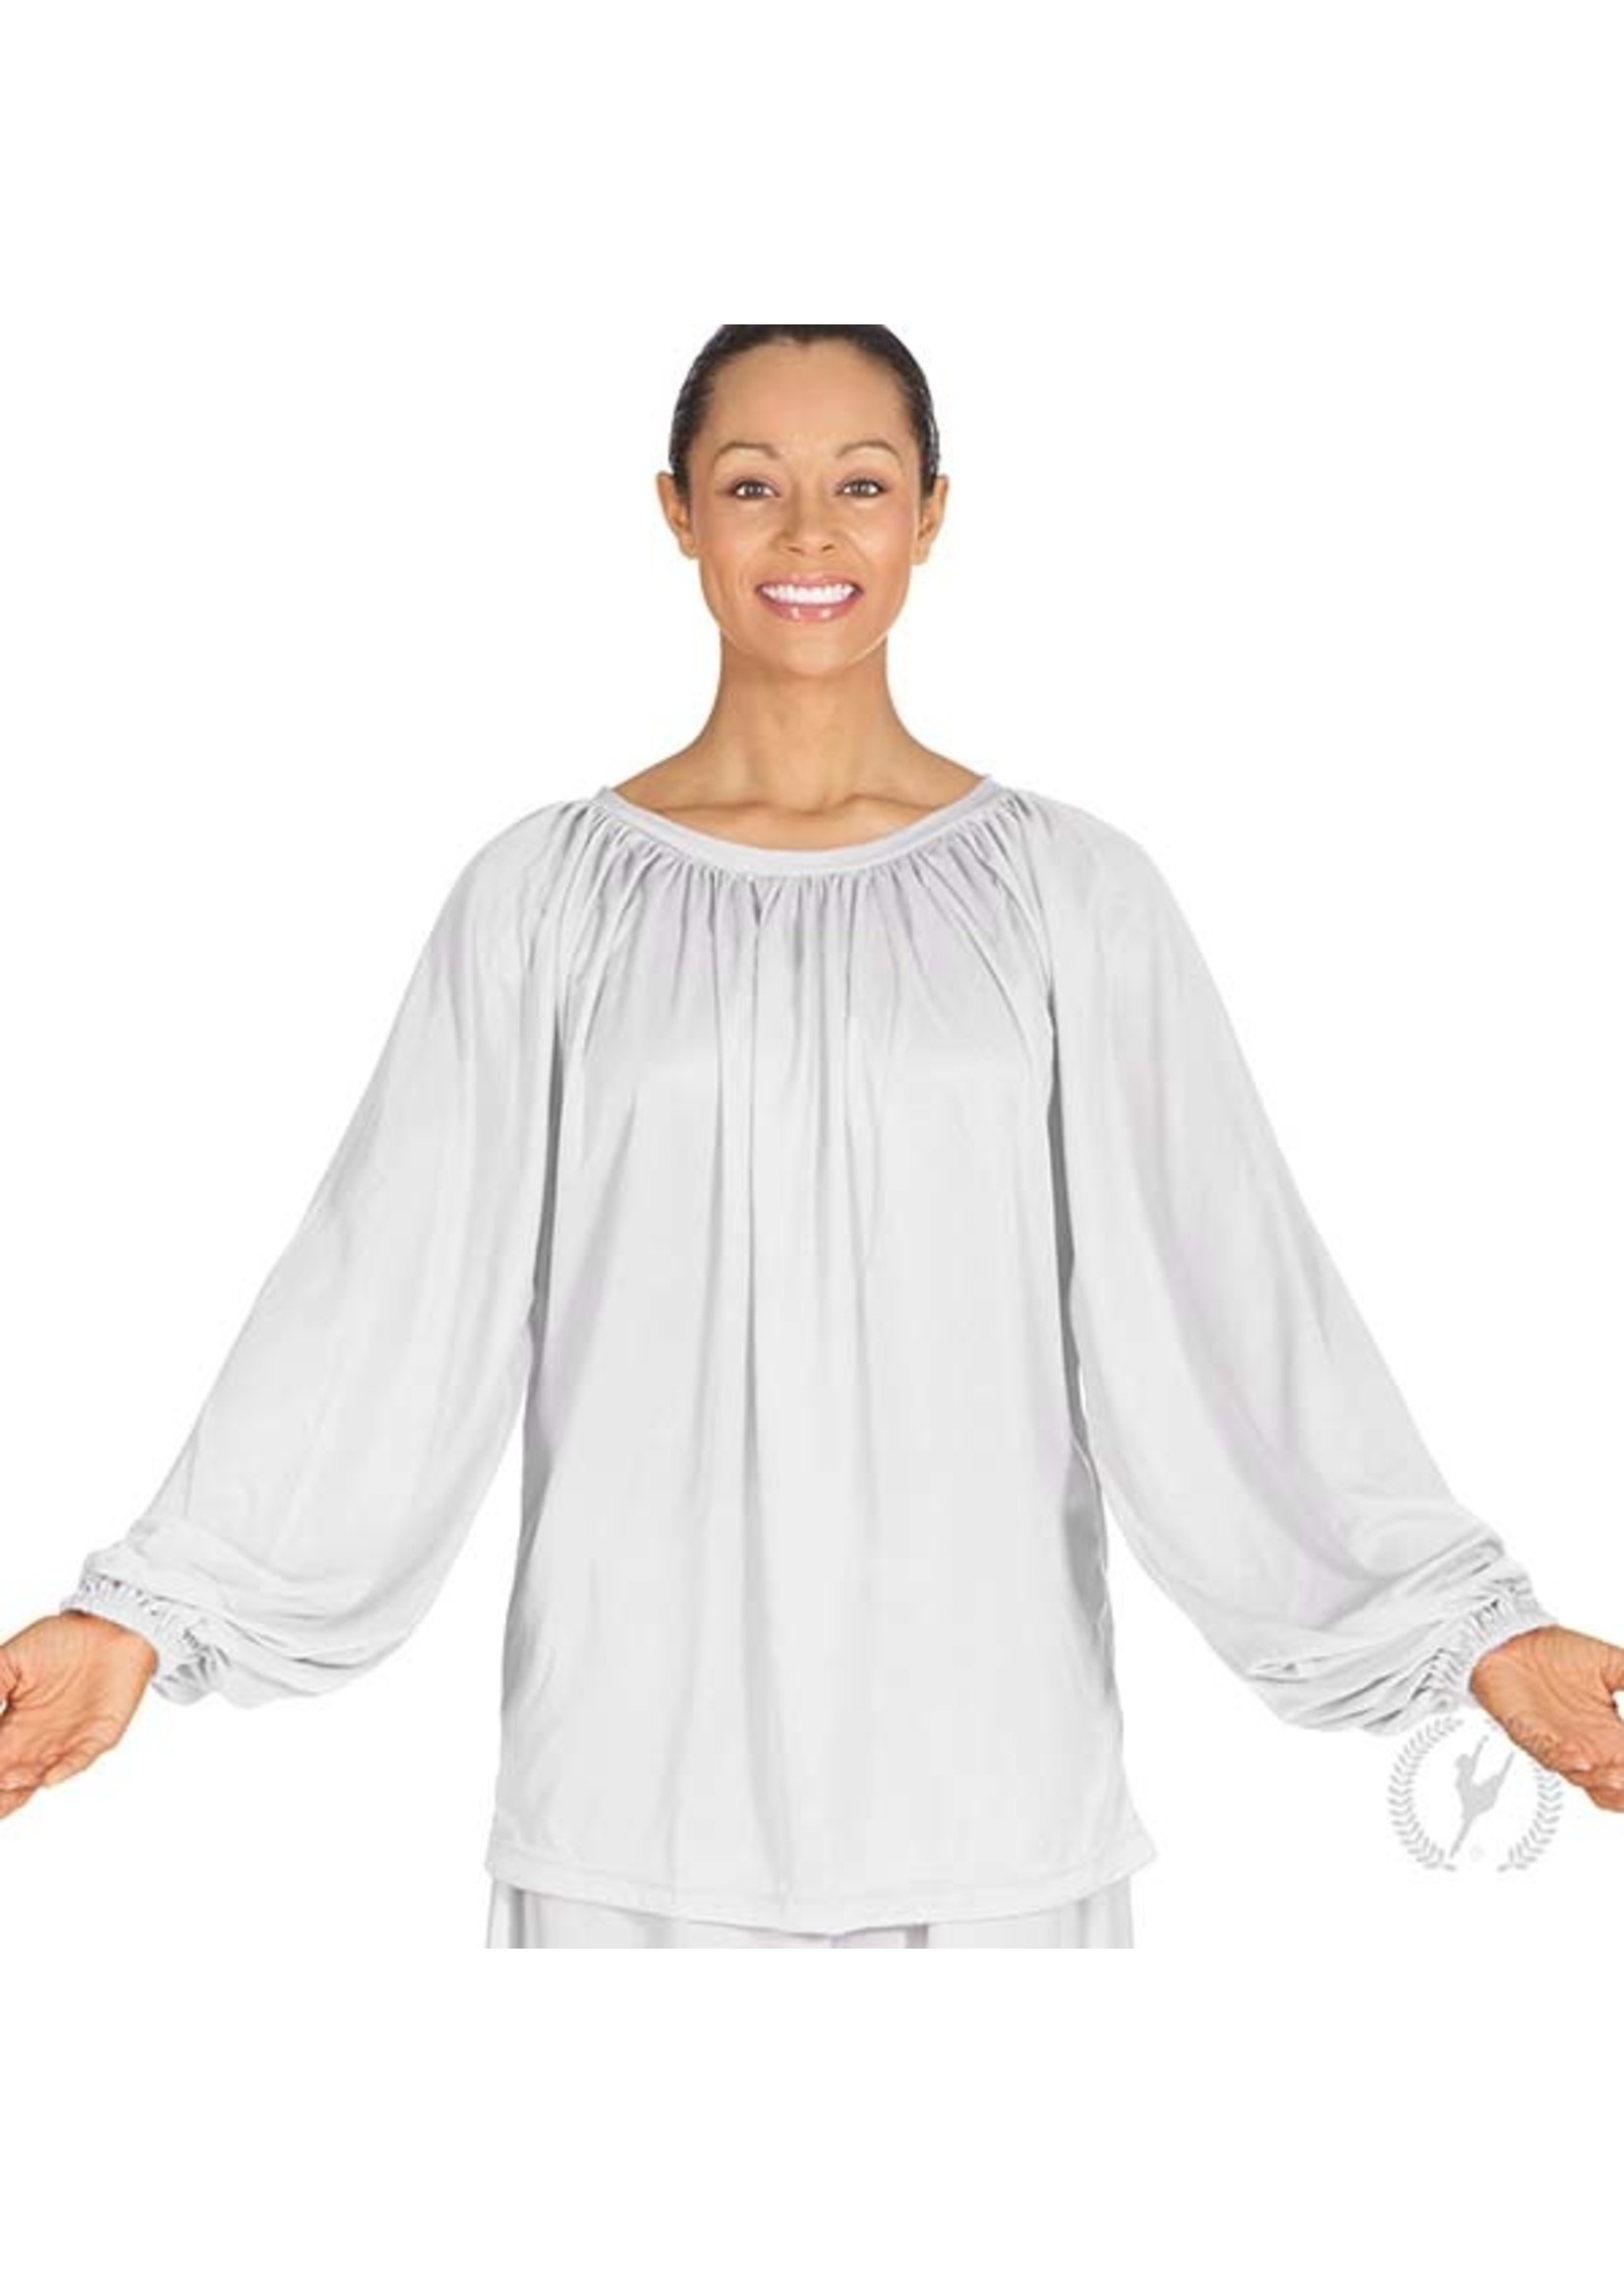 Gathered Loose Fit Praise Top